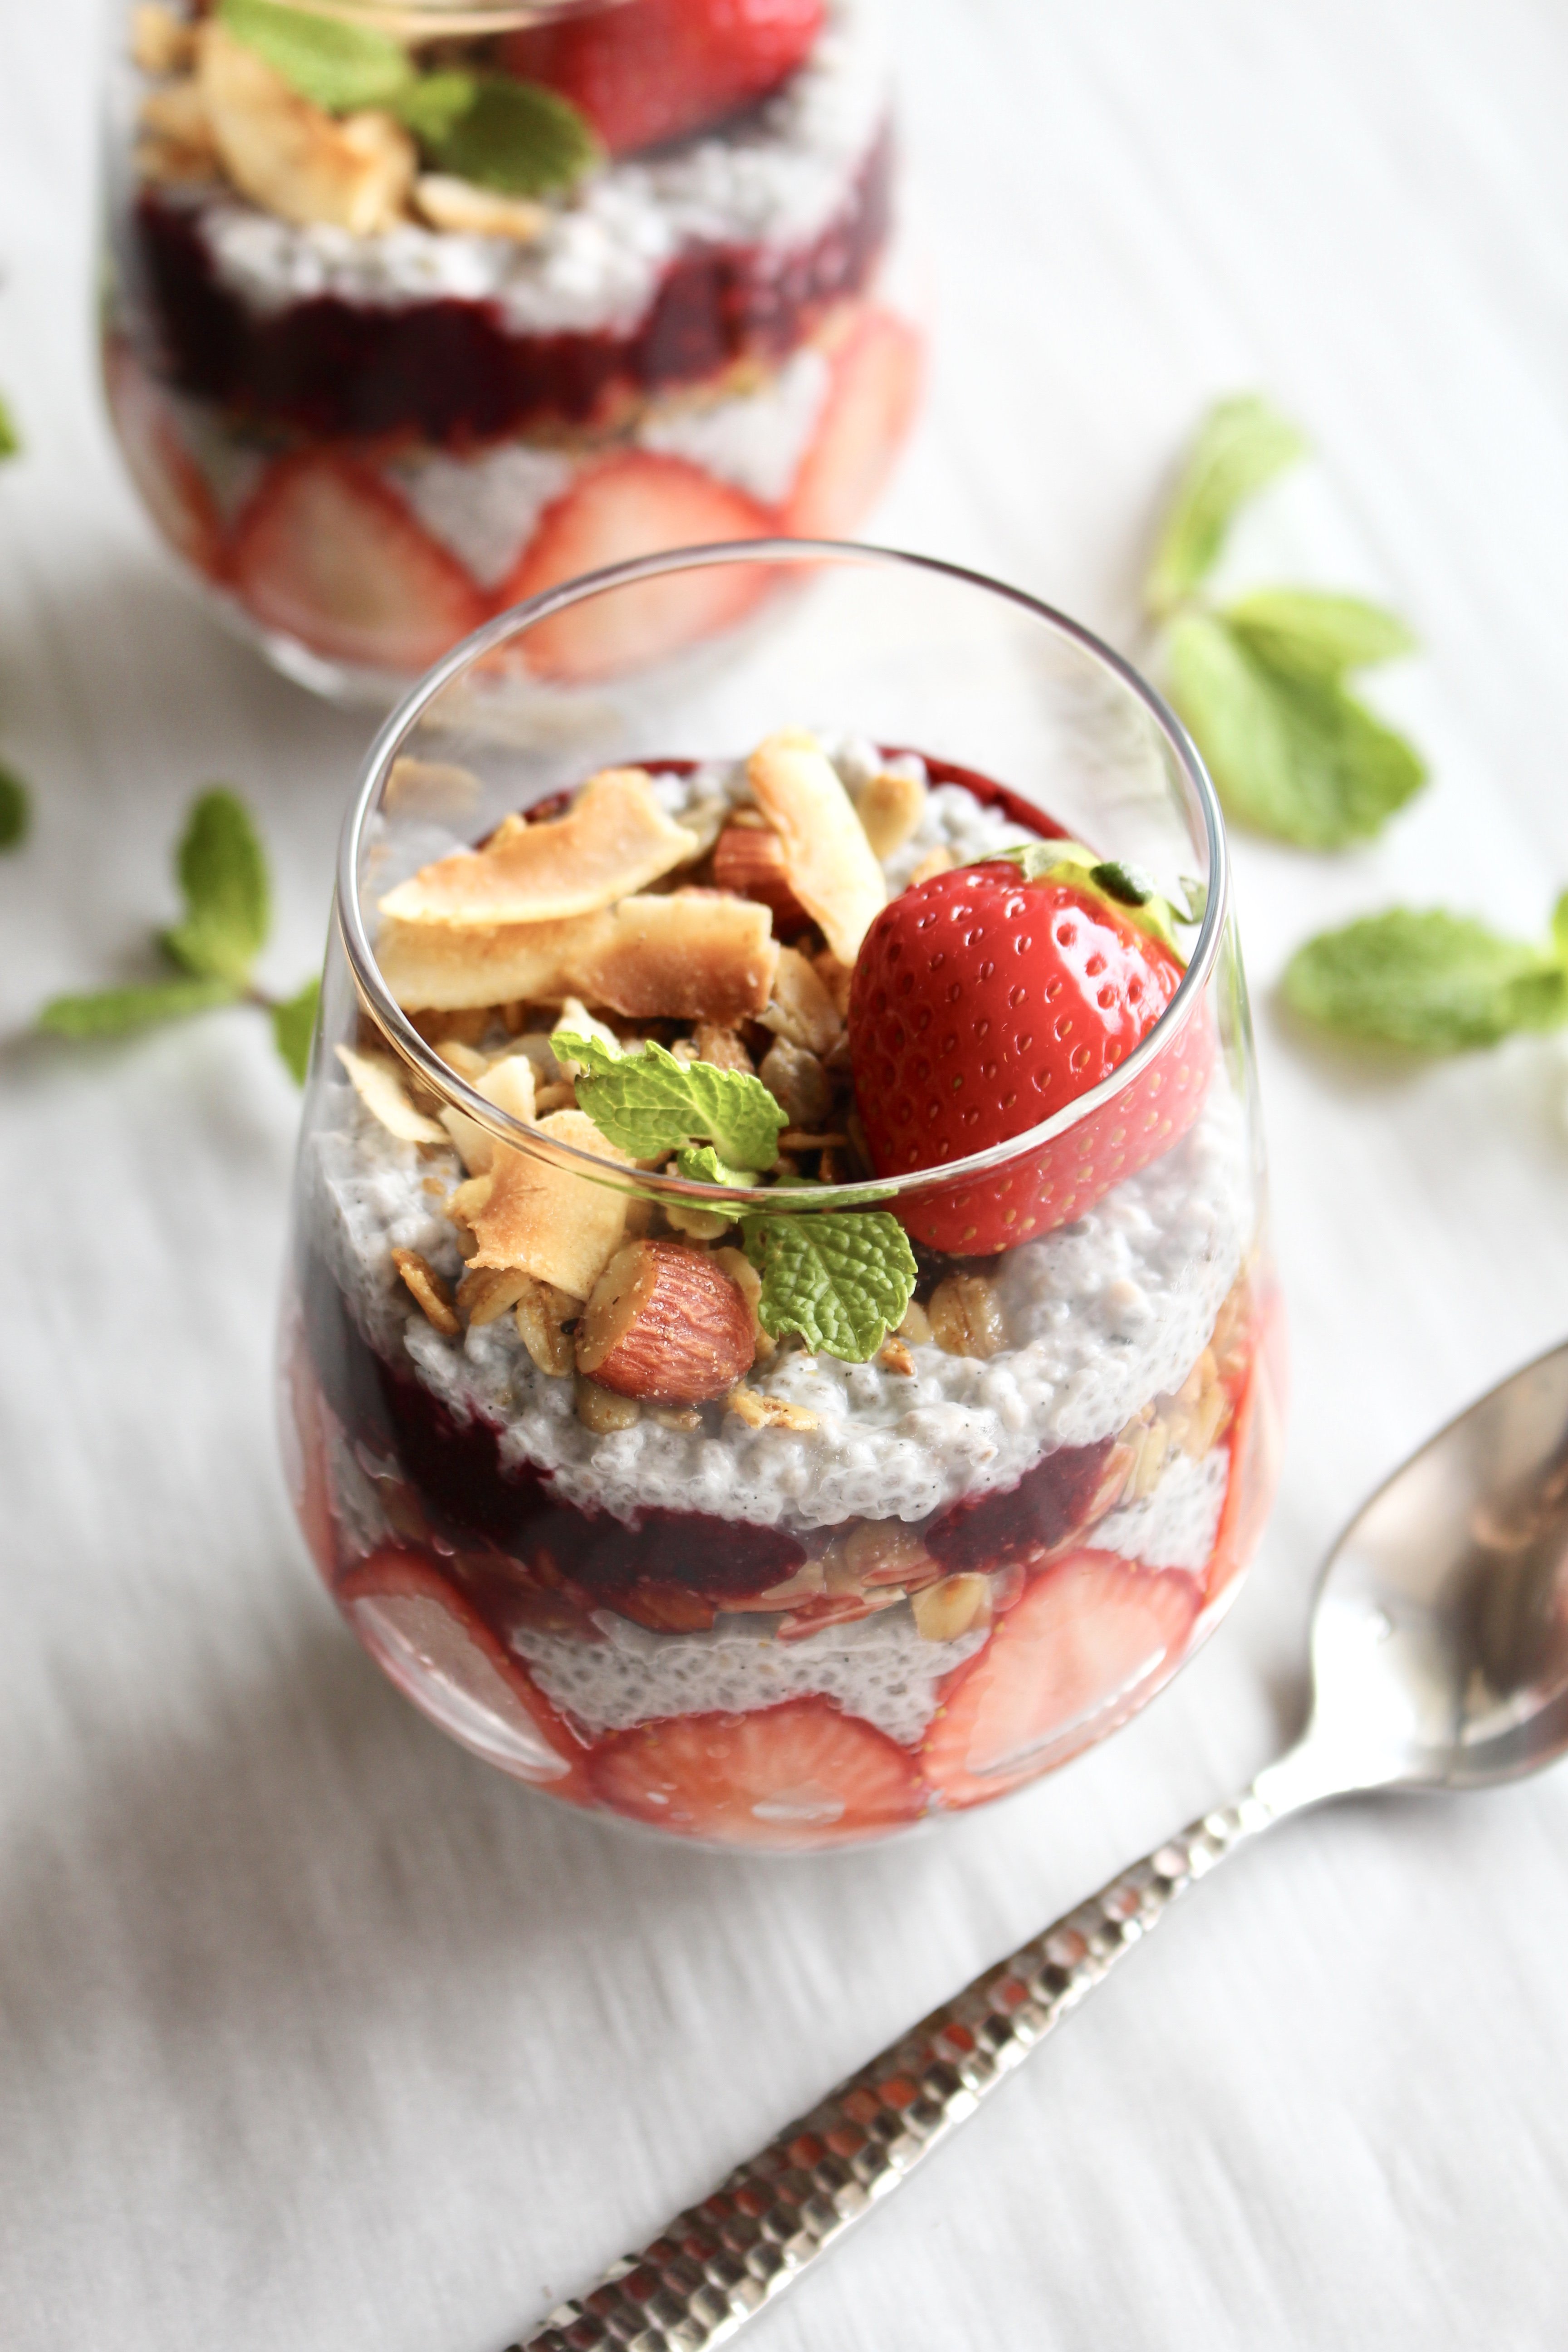 Chia seed parfait with berries, coconut, and strawberries!